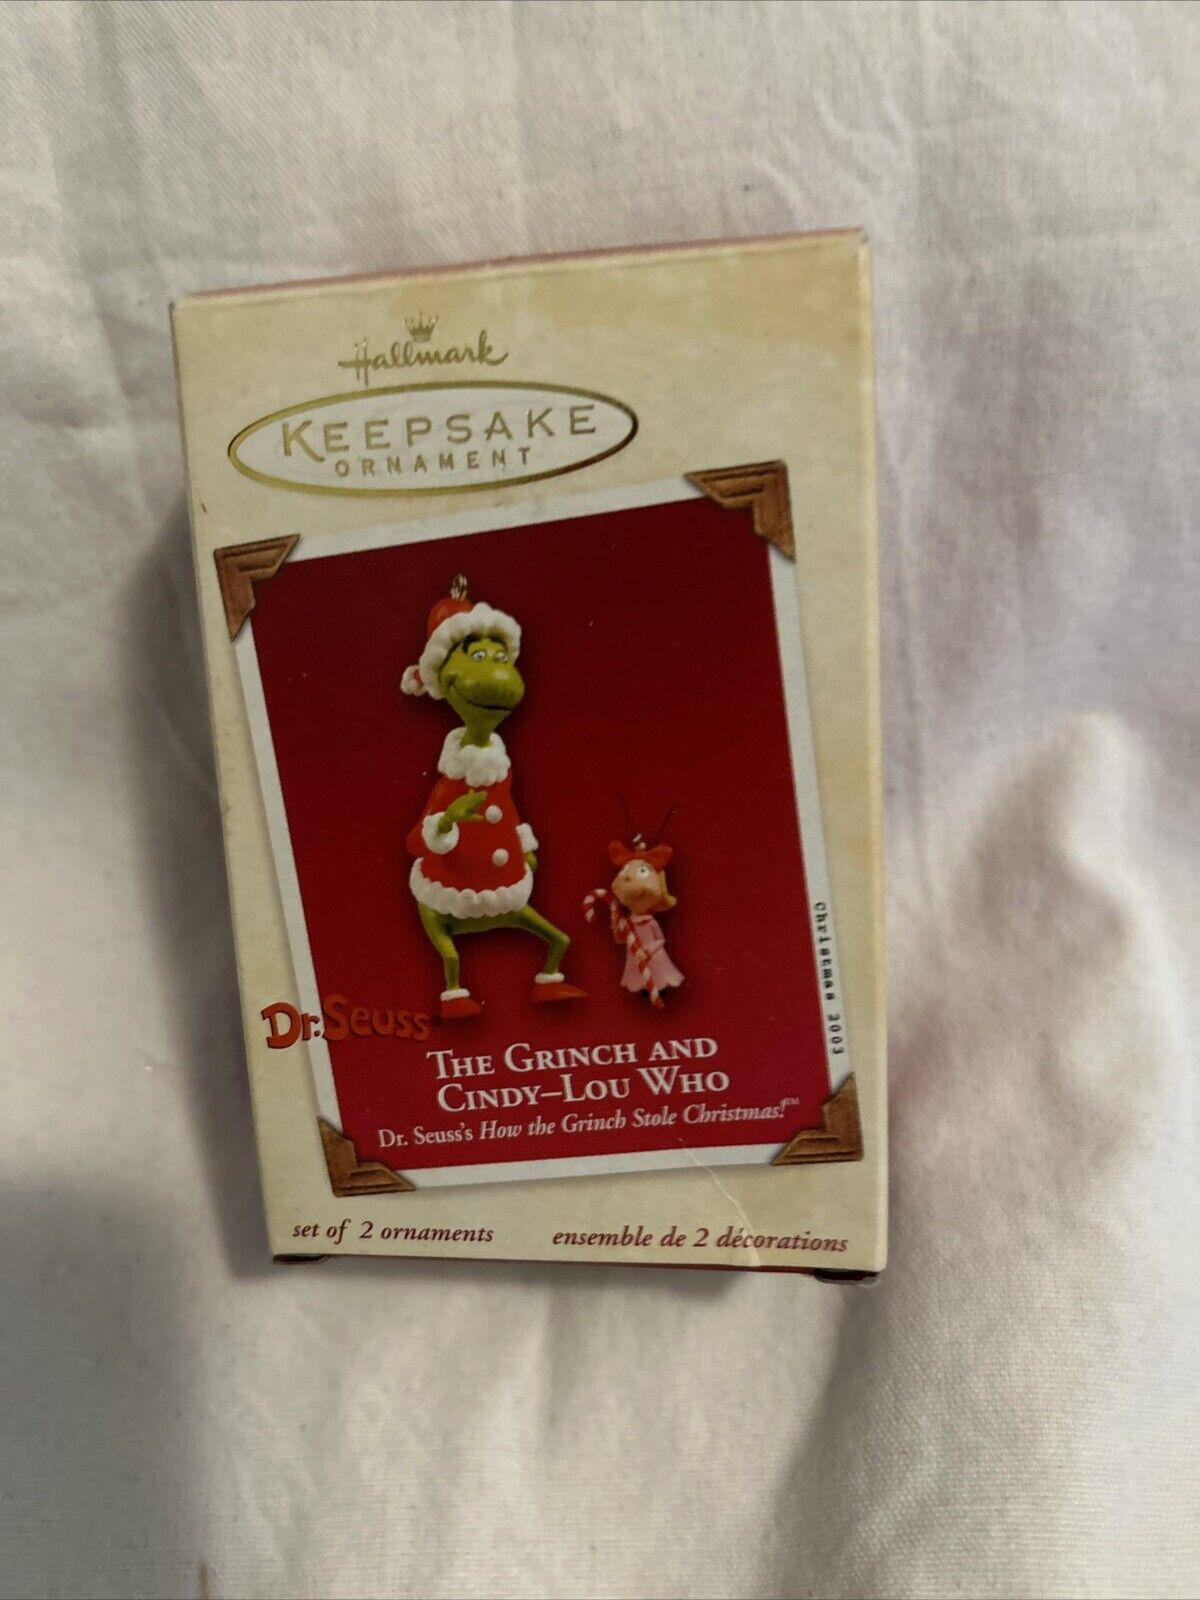 Hallmark 2003 Dr. Seuss The Grinch Ornament MISSING CINDY-LOU WHO